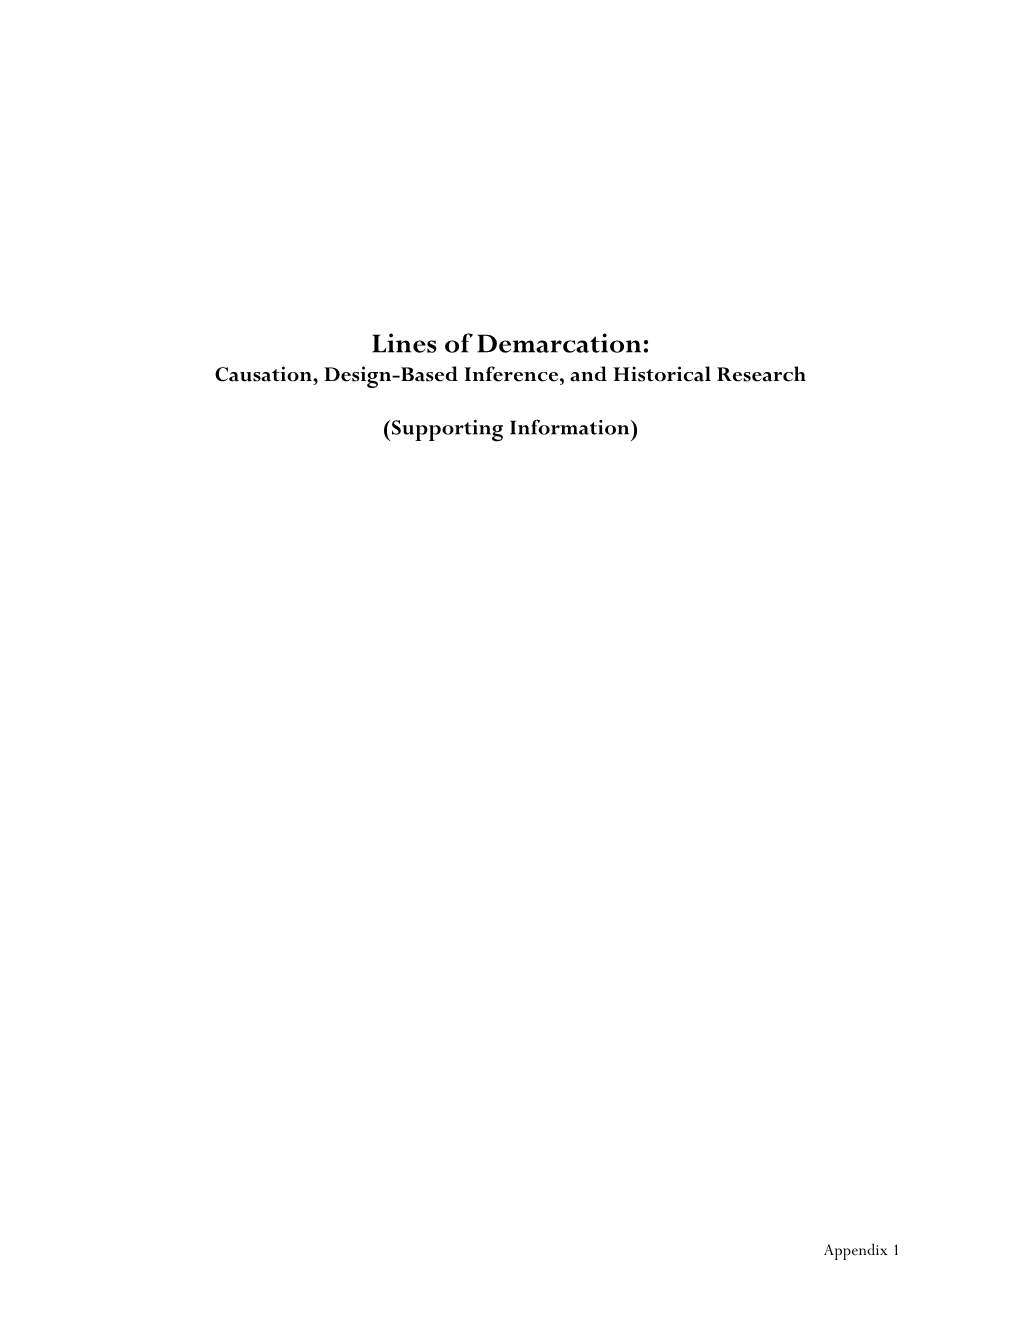 Lines of Demarcation: Causation, Design-Based Inference, and Historical Research